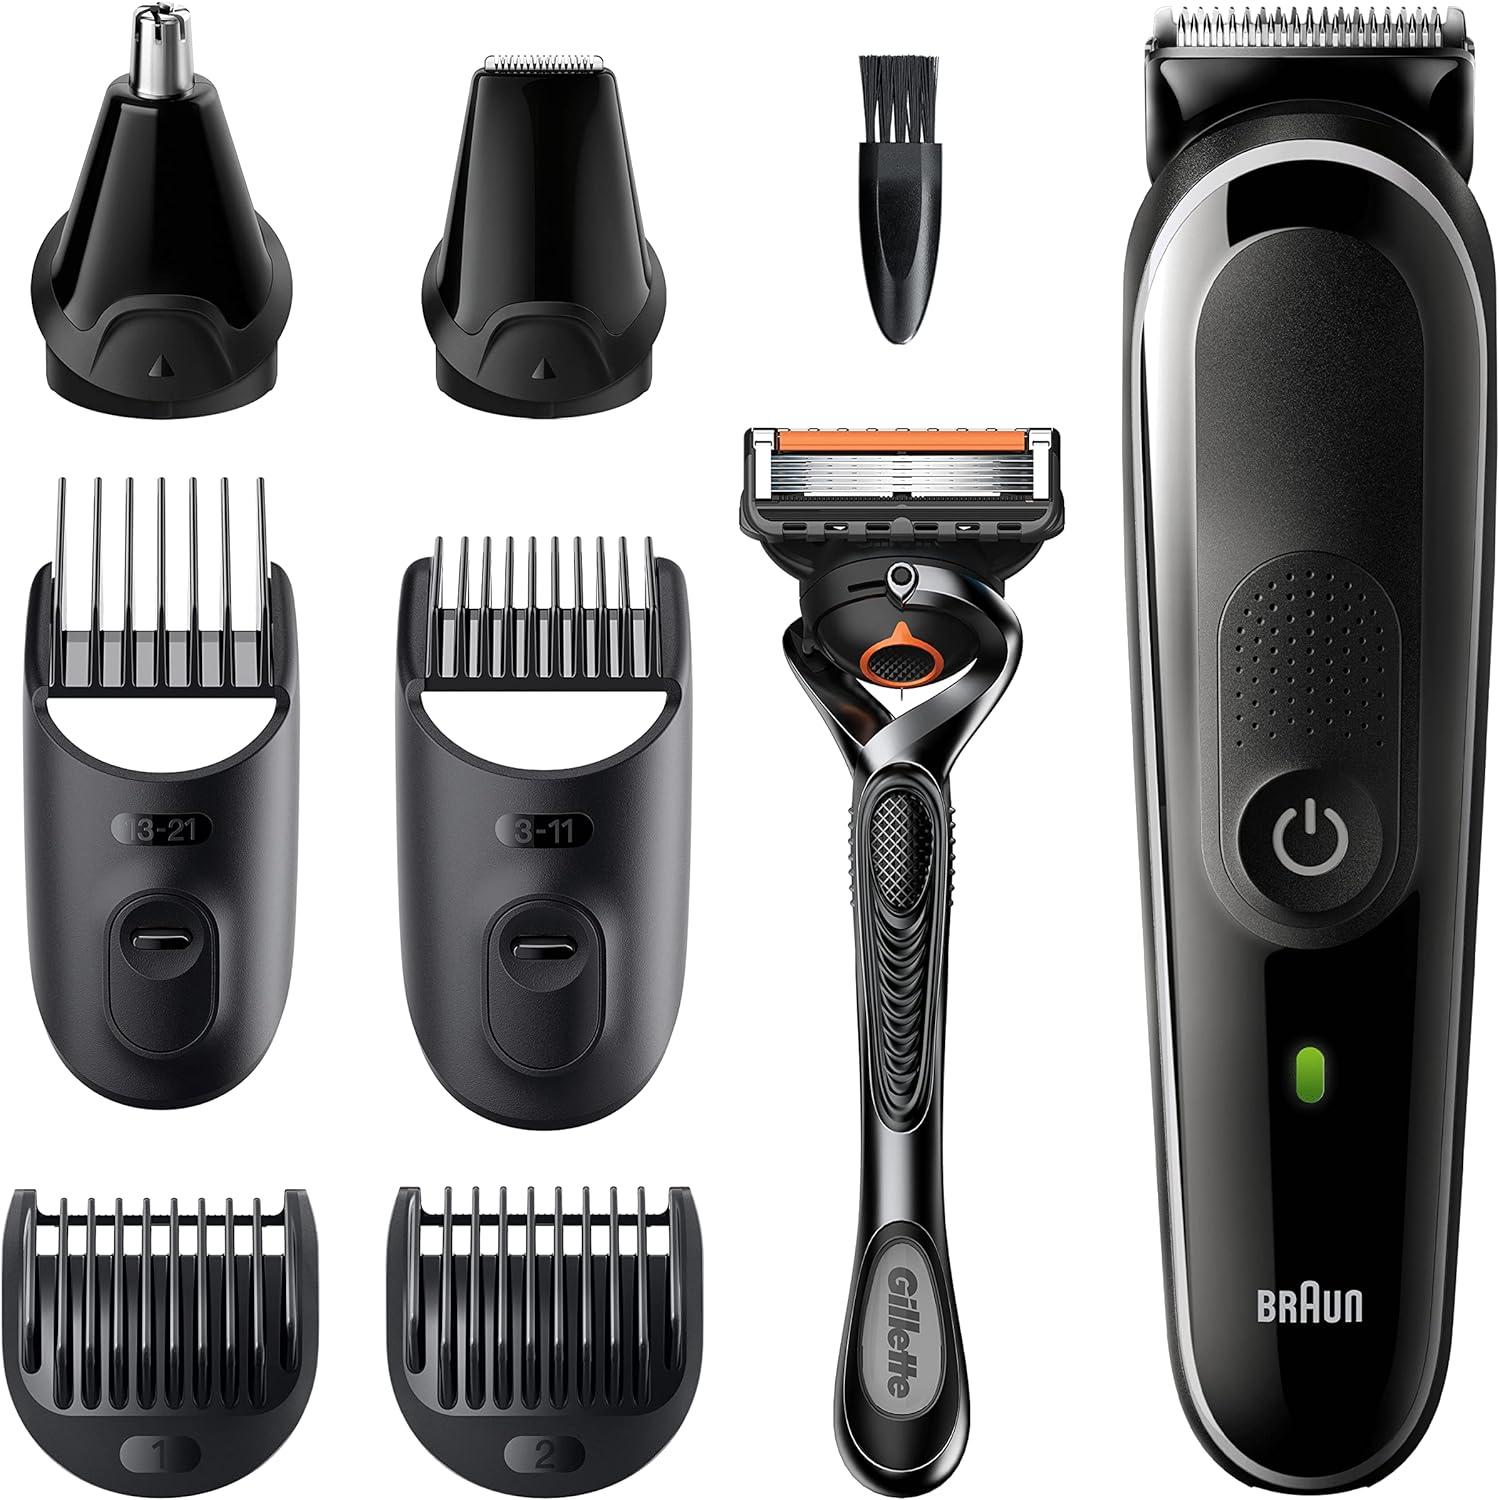 Braun 8-In-1 All-In-One Series 5 Male Grooming Kit With Beard Trimmer Hair  Clippers Ear & Nose Trimmer & Gillette Razor 6 Attachments Gifts For Men UK  2 Pin Plug MGK5260 Black/Grey